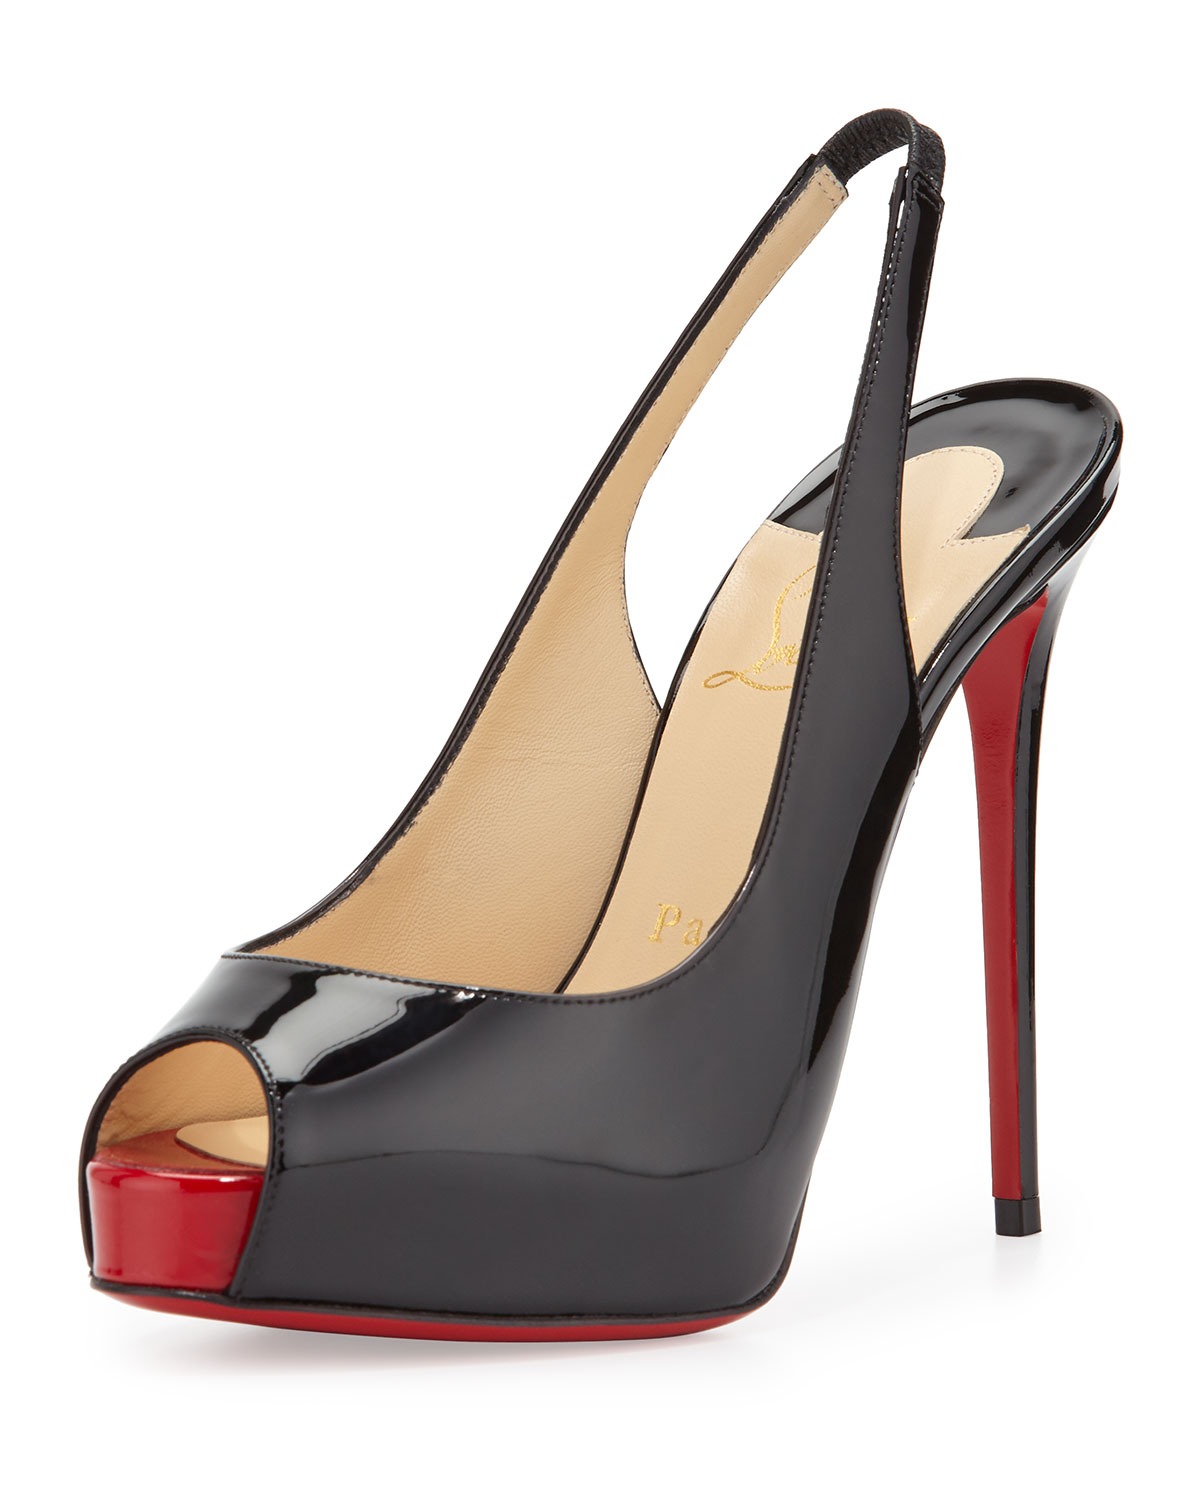 Lyst - Christian Louboutin Private Number Patent Peep-toe Red Sole ...